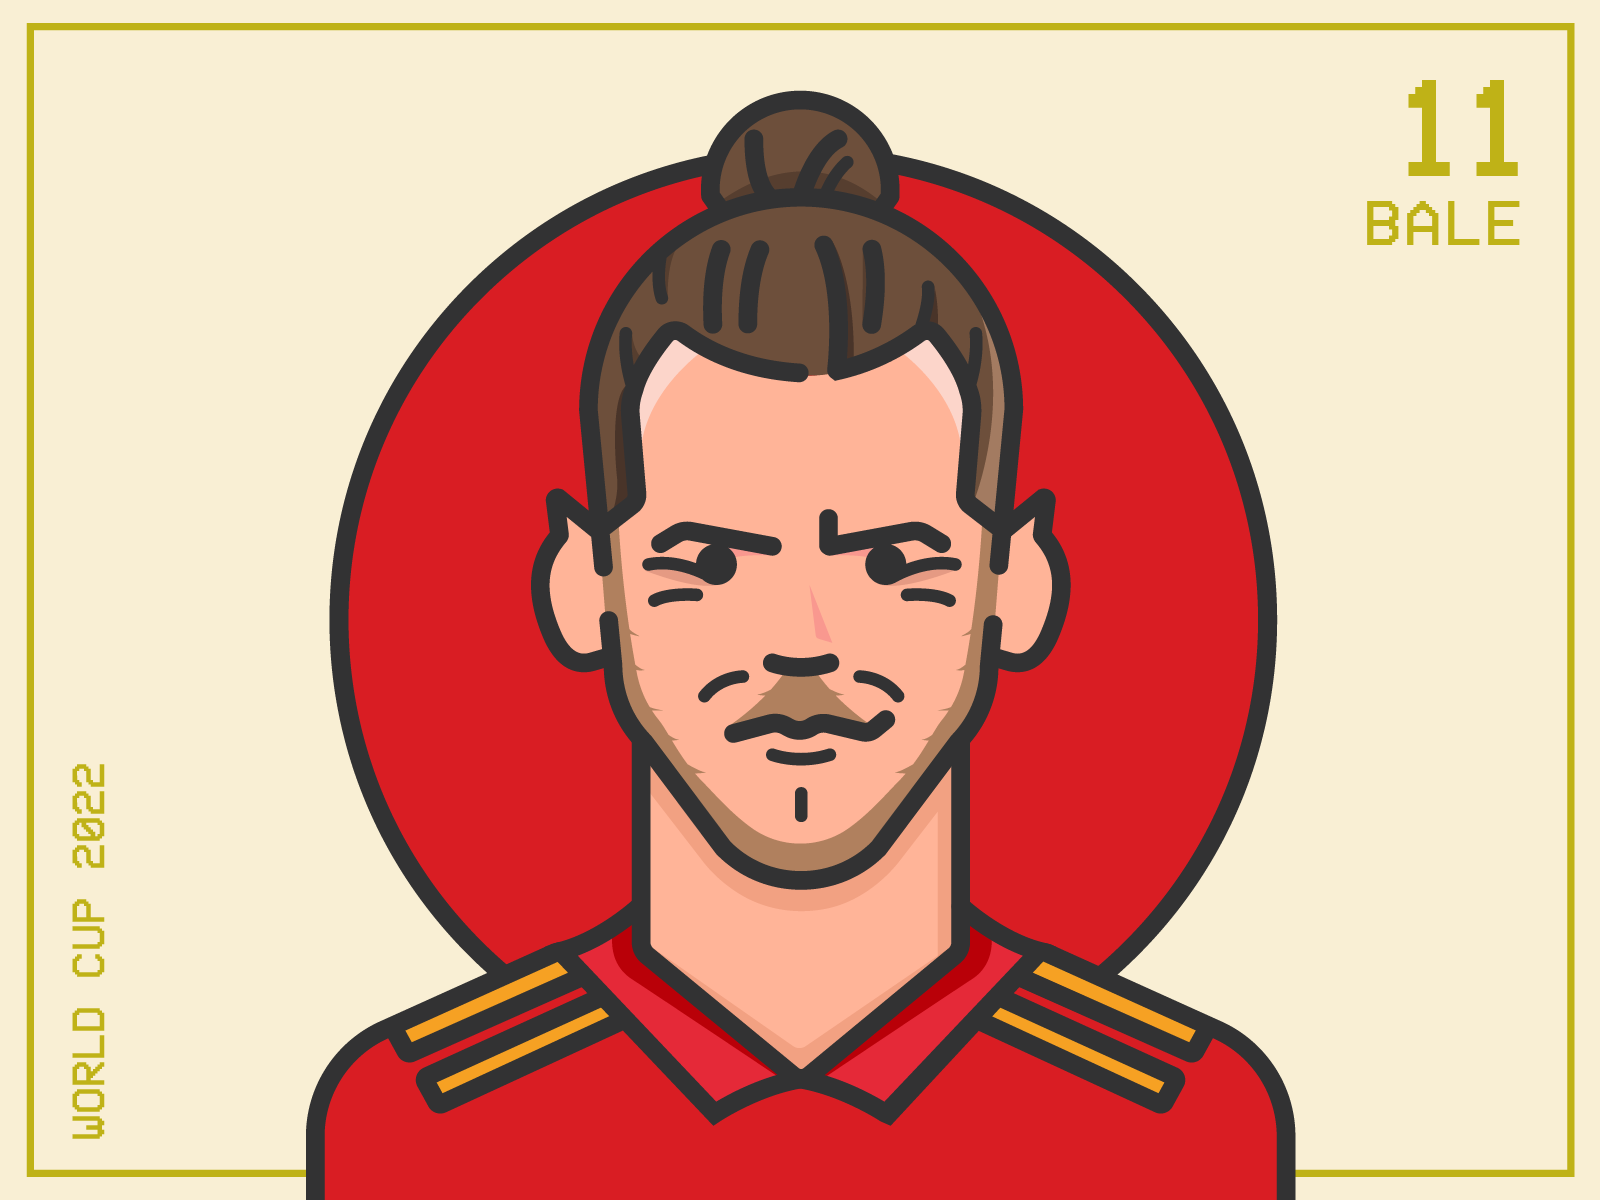 Gareth Bale | World Cup 2022 by Ozza Okuonghae on Dribbble